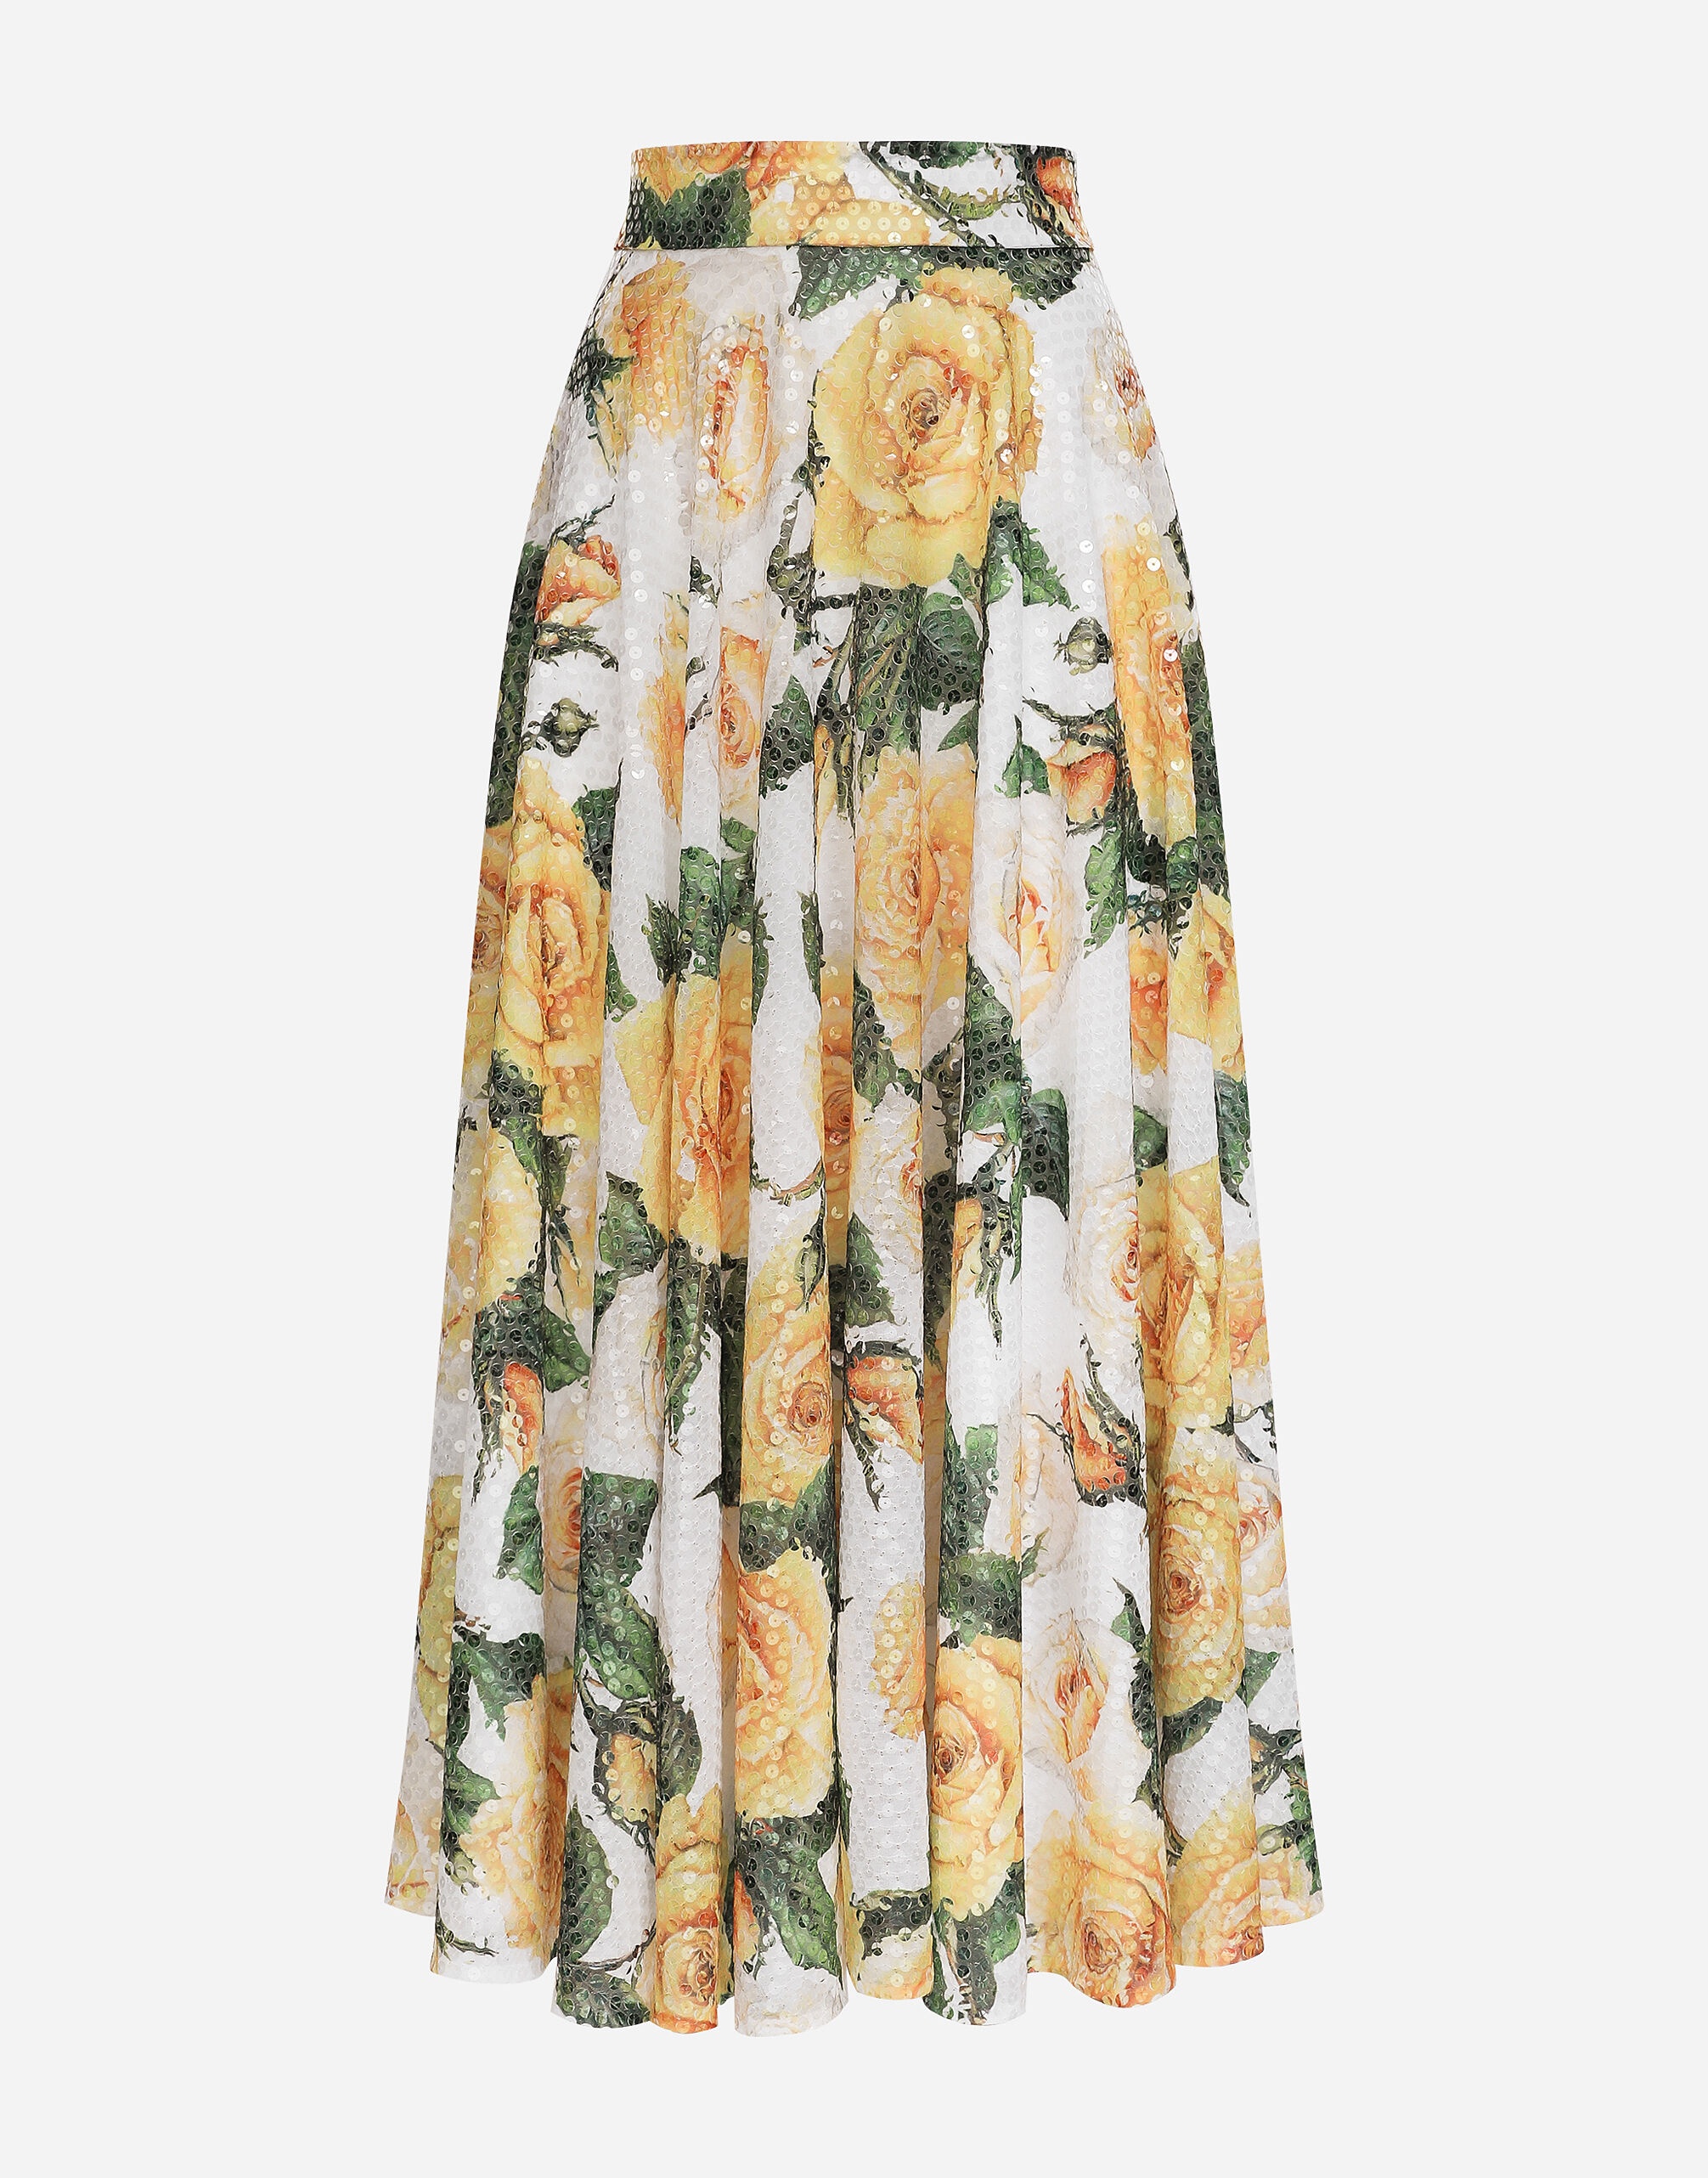 Sequined midi circle skirt with yellow rose print - 1